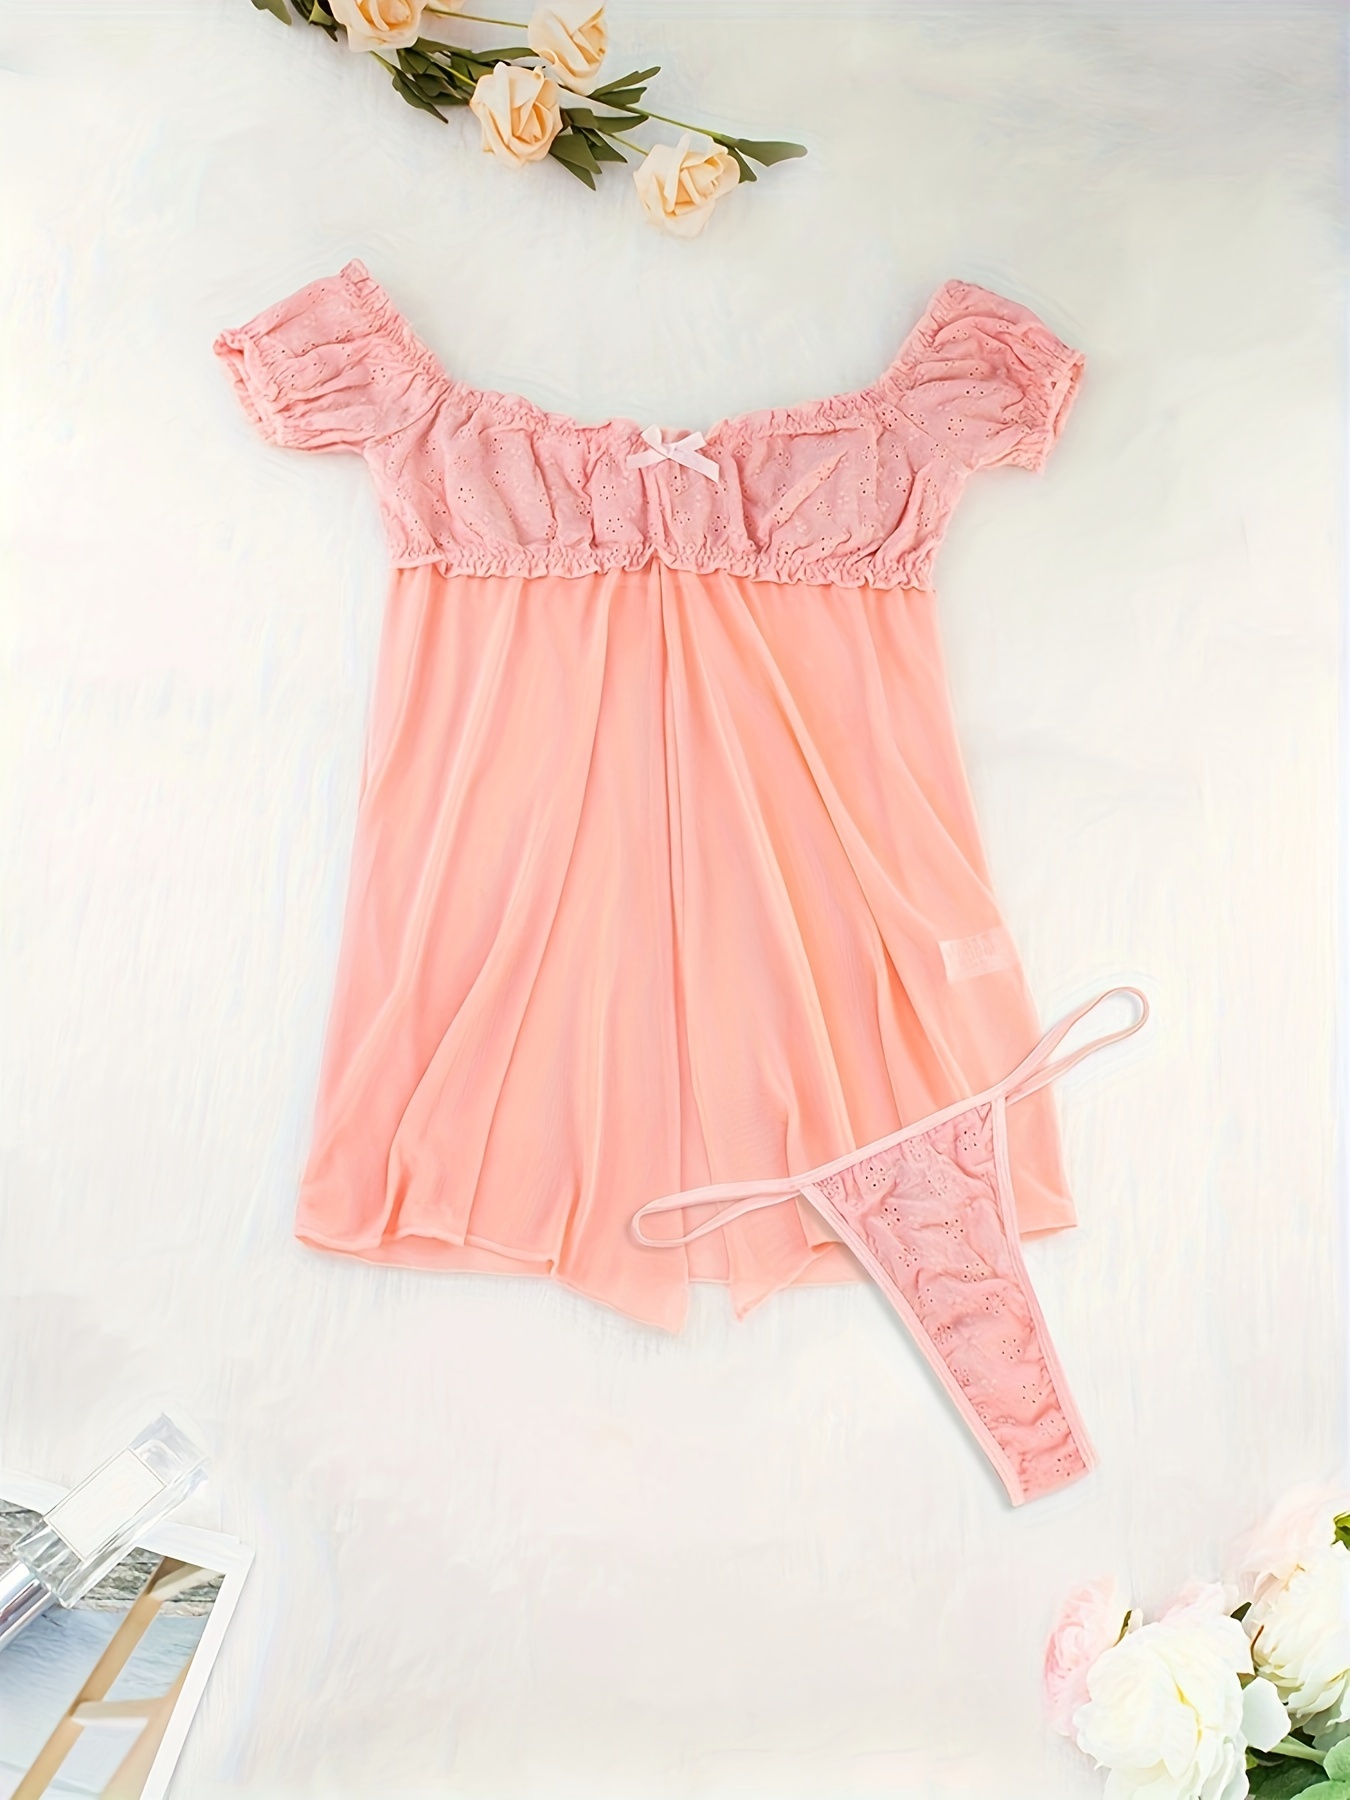 Pink Lace Embroided Mesh Babydoll Nightie